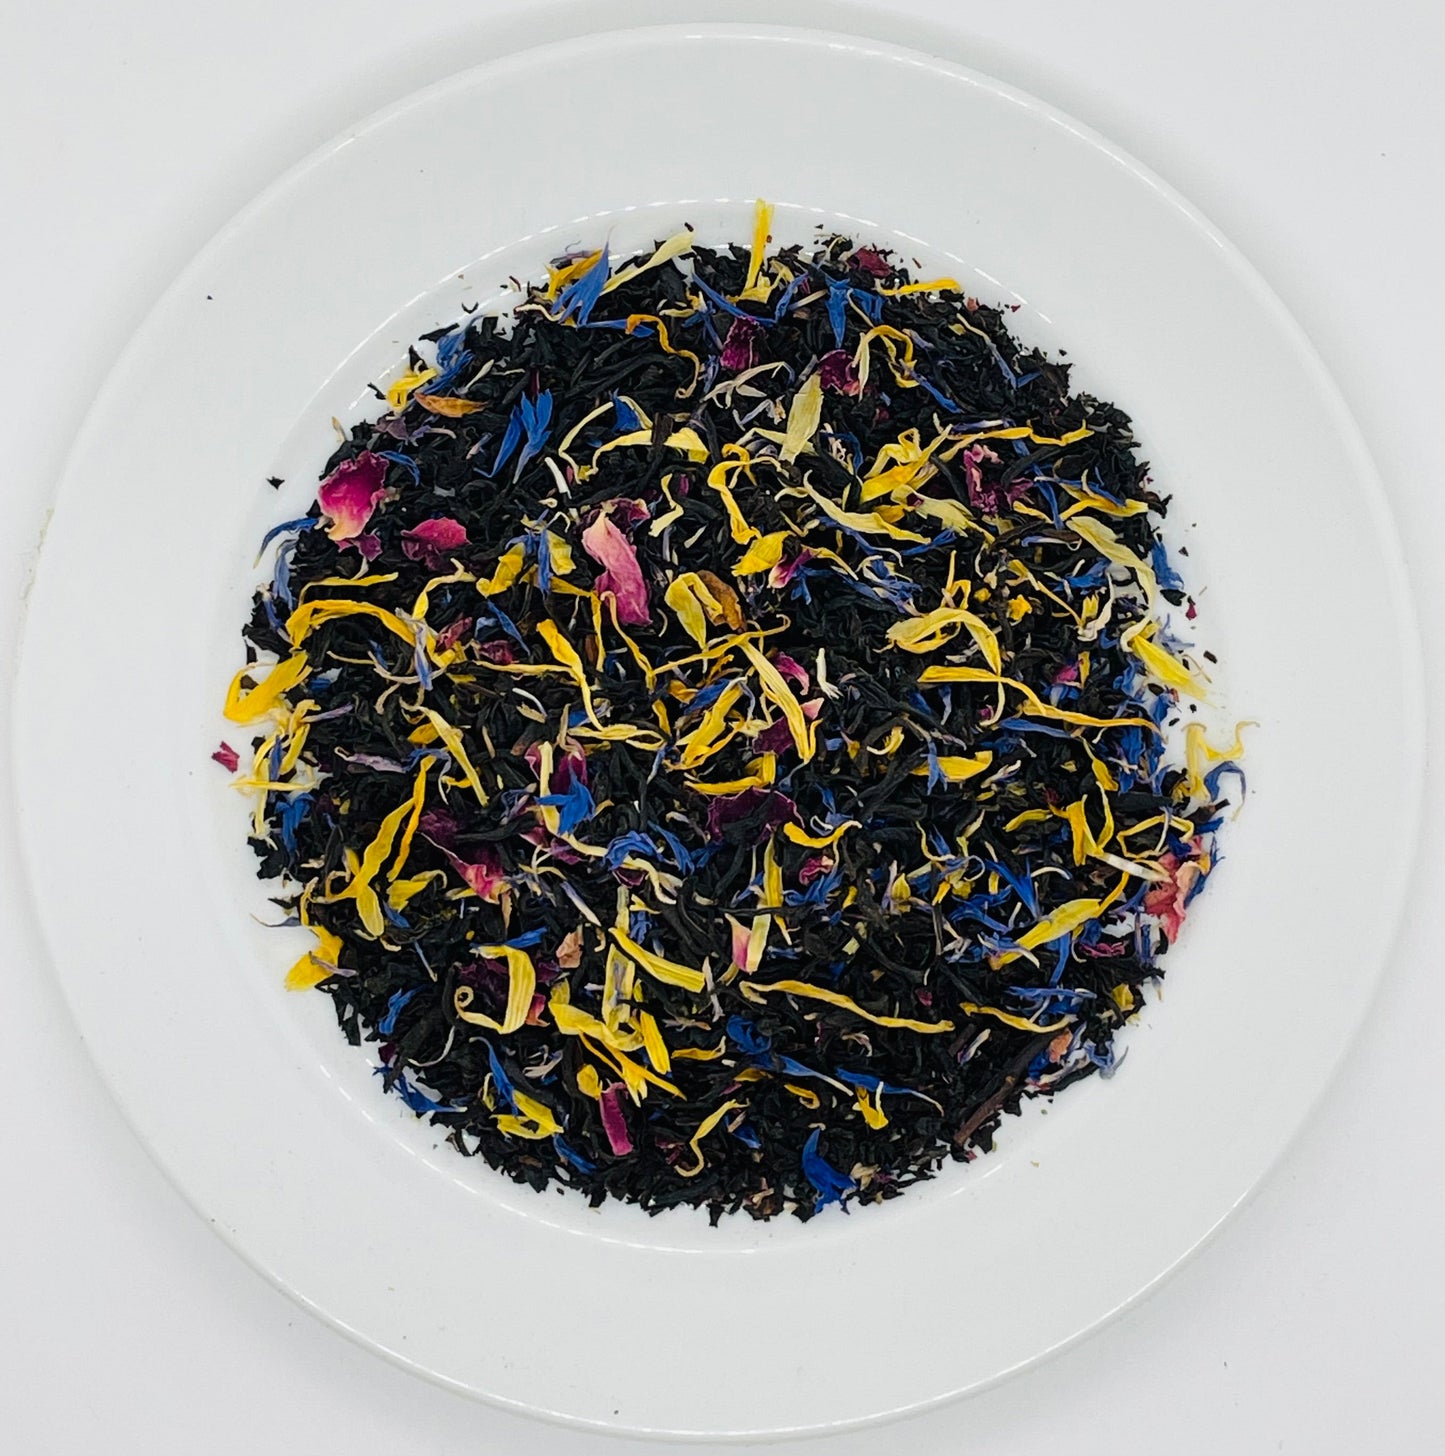 This picture shows a beautiful blend of organic black tea, calendula petals, cornflower, and bergamot oil. The tea is a vibrant mix of yellow, blue, and pink colours, and it is sure to brighten up your morning.